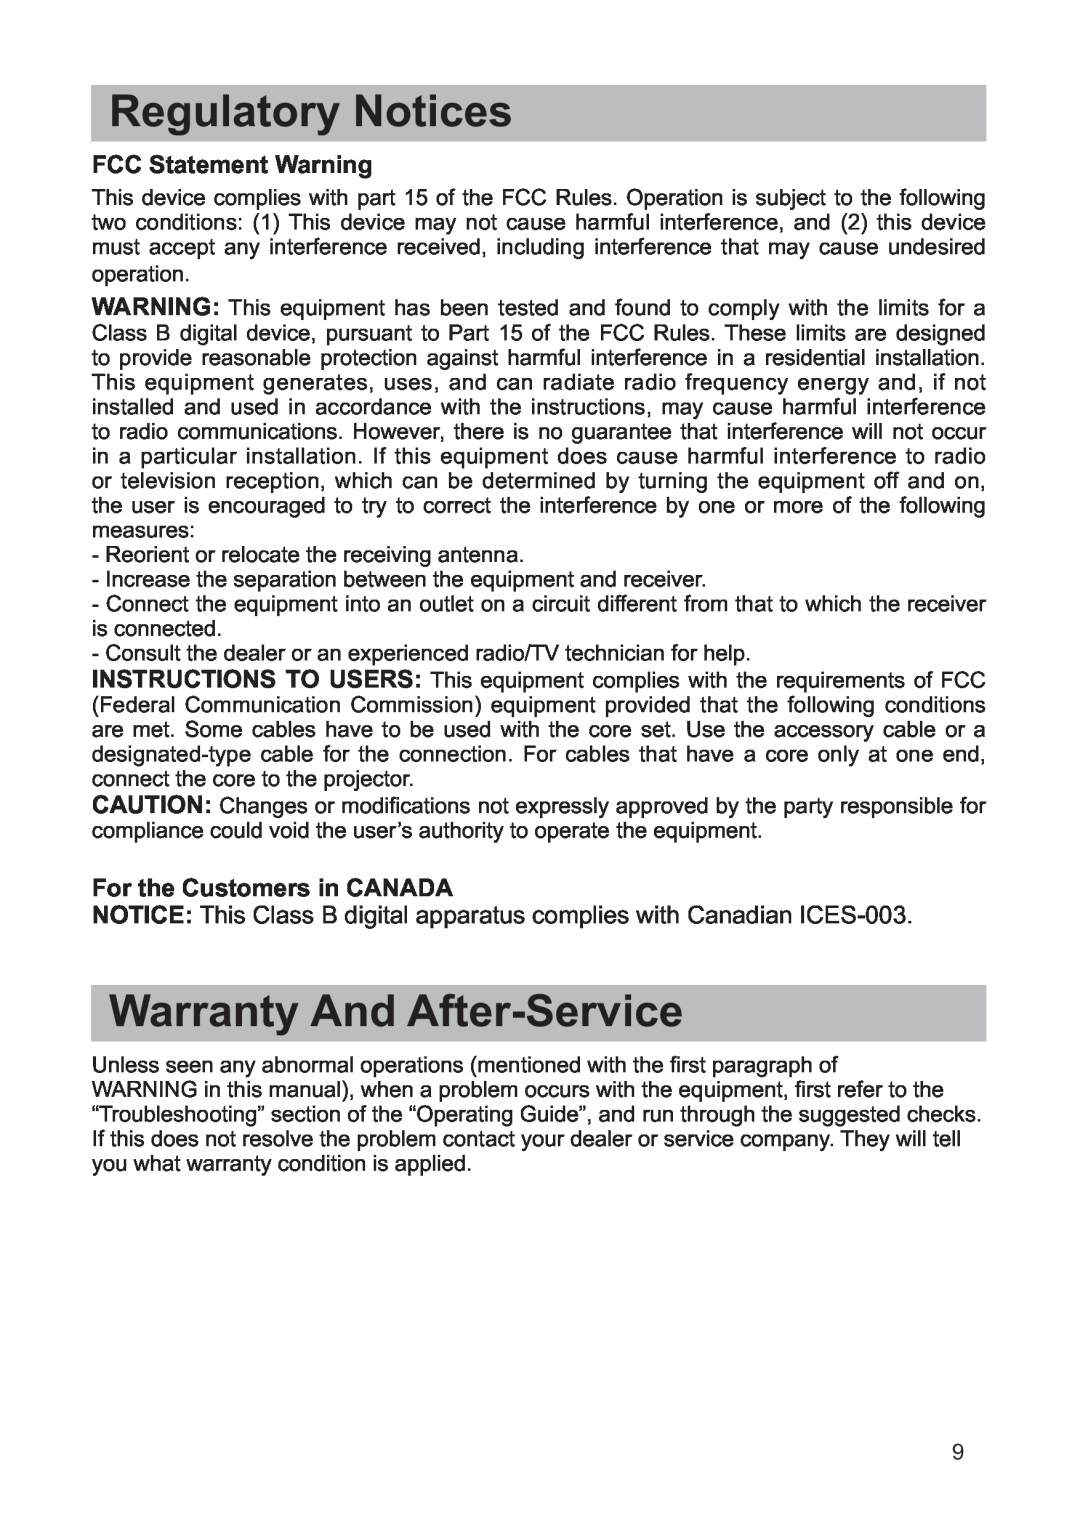 Hitachi ED-X32 Regulatory Notices, Warranty And After-Service, FCC Statement Warning, For the Customers in CANADA 